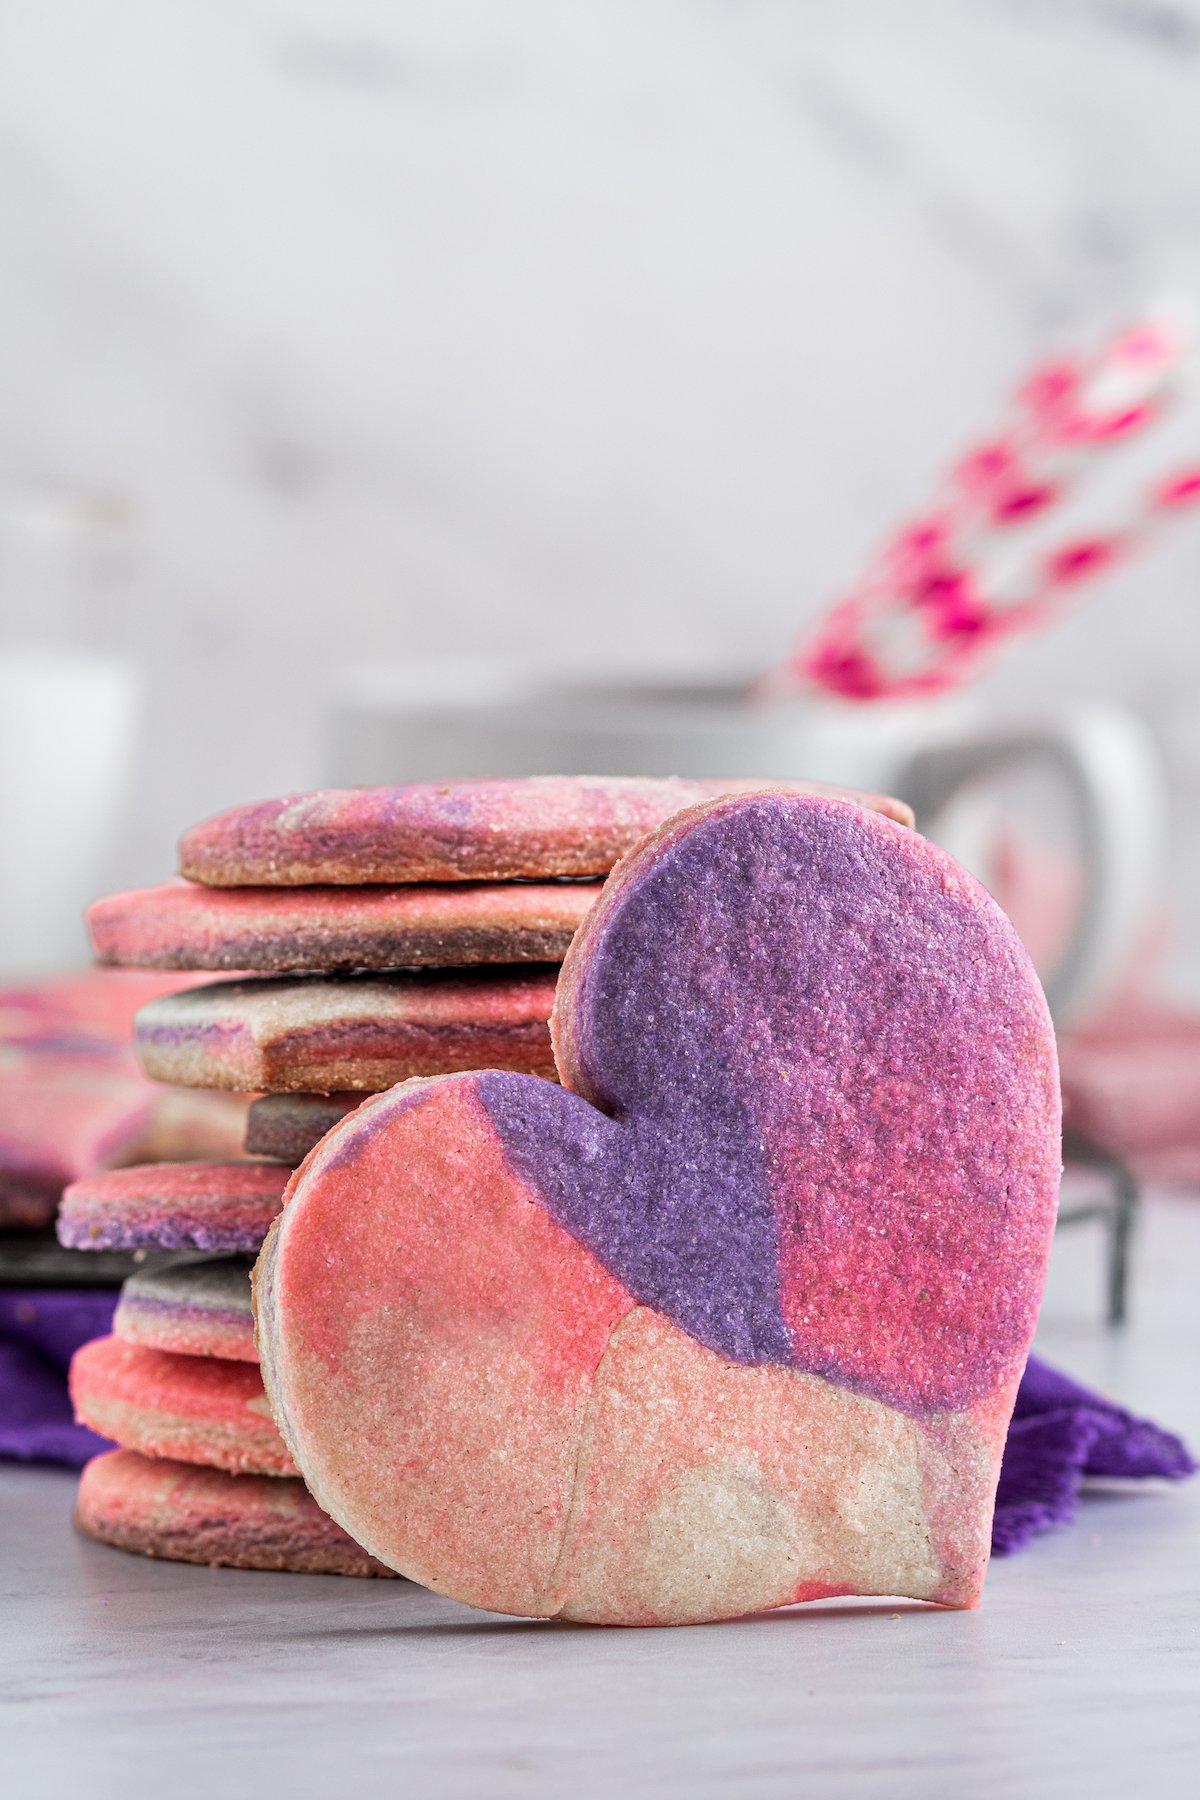 A stack of pink and purple cookies, with one cookie propped up against the stack.